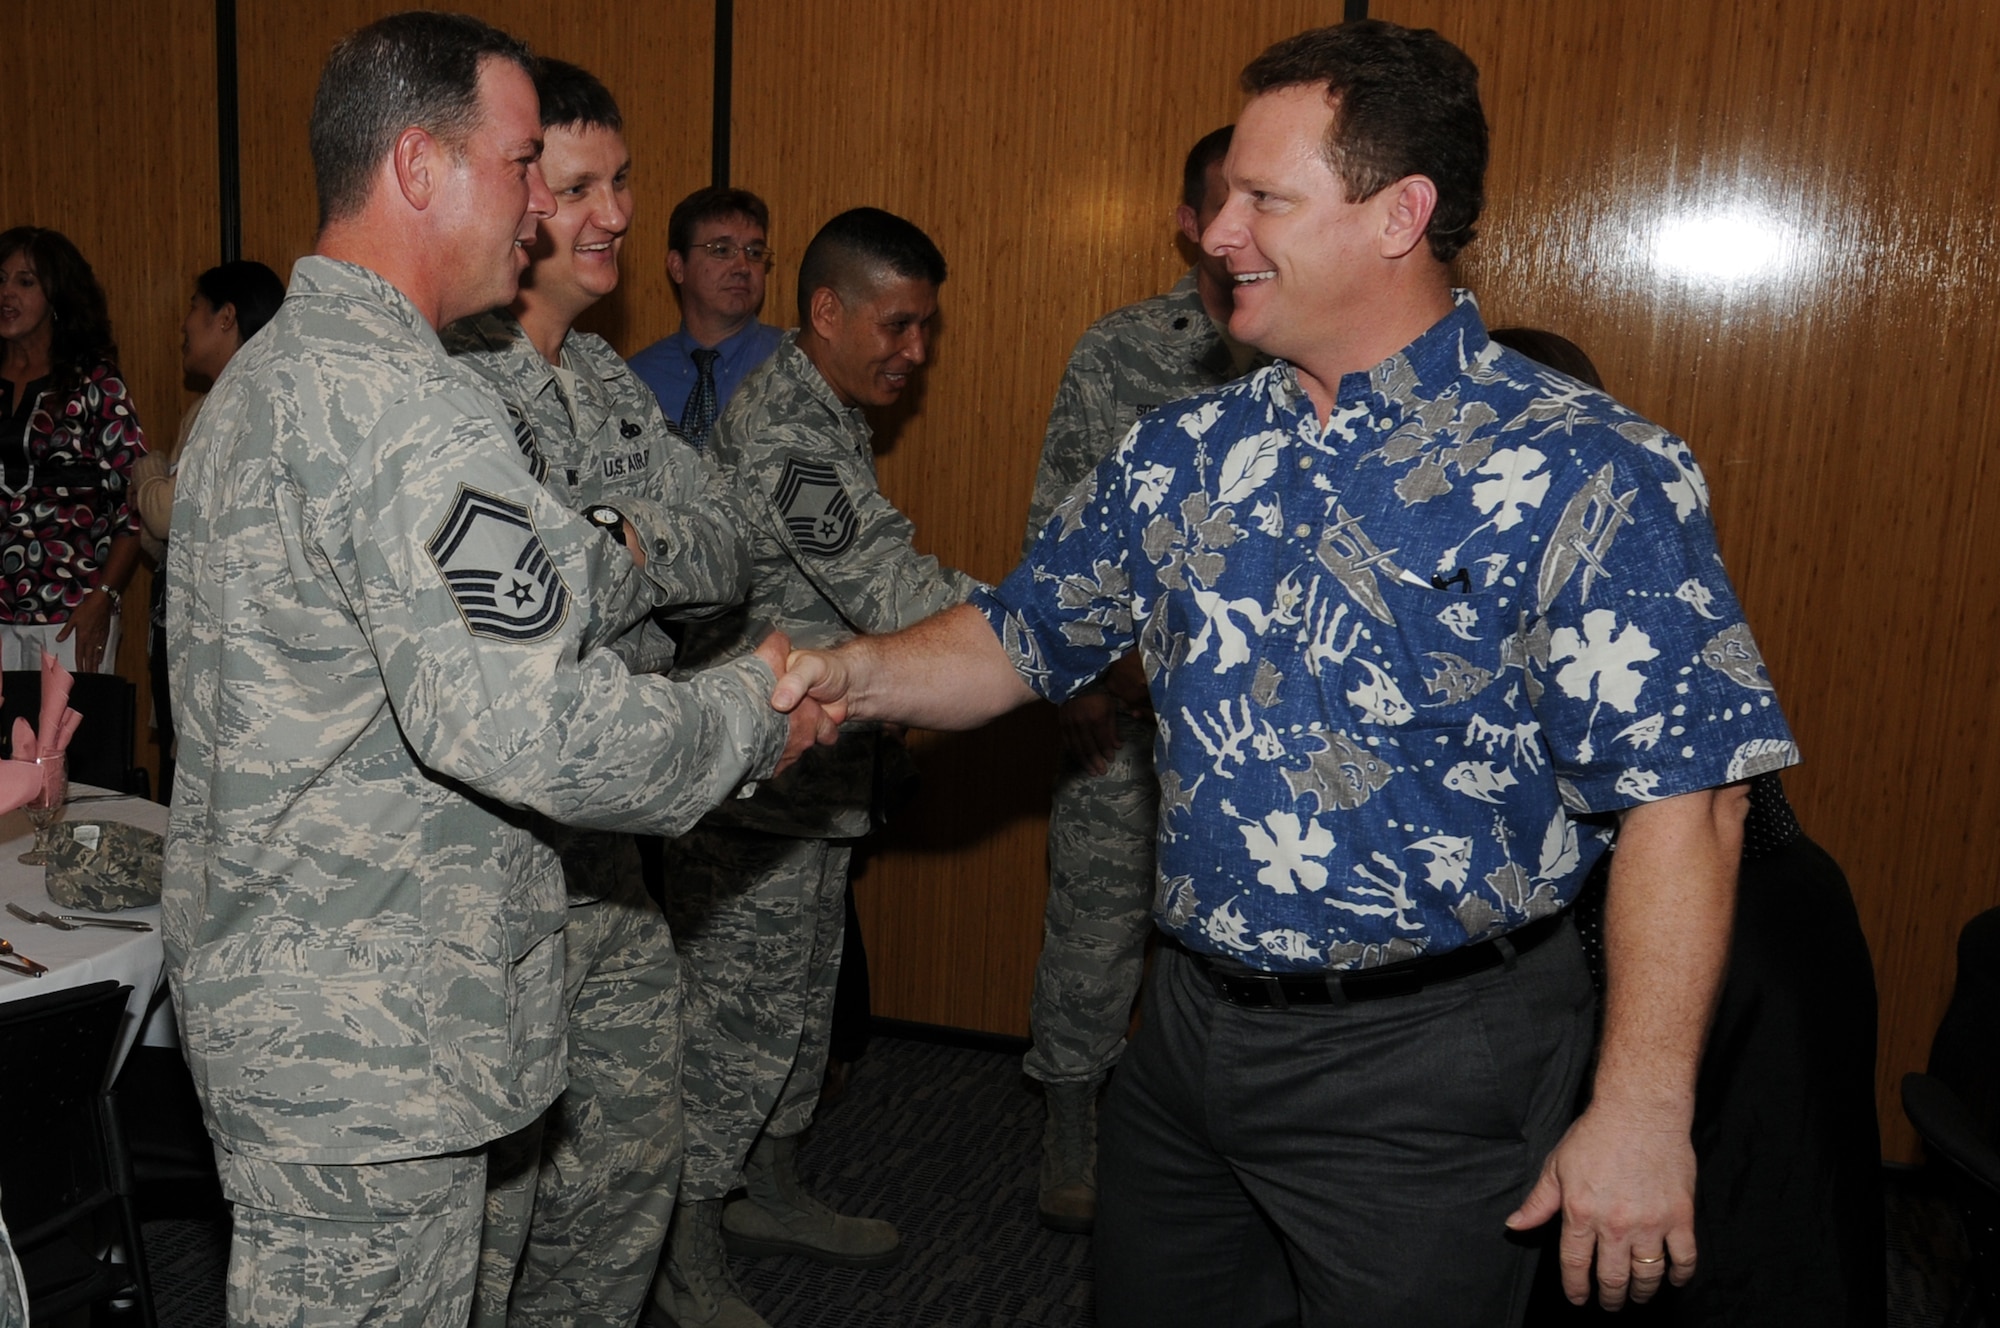 ANDERSEN AIR FORCE BASE, Guam - Lt. Gov. Ray Tenorio of Guam, shakes hands with representatives from the 36th Wing Inspection Group during his visit with his wife, Attorney Naoko Shimizu, to the Women?s History Month Luncheon here, April 5. Lt Gov. Tenorio came to meet the base community and support his wife during her speech.(U.S. Air Force photo/Senior Airman Carlin Leslie)
